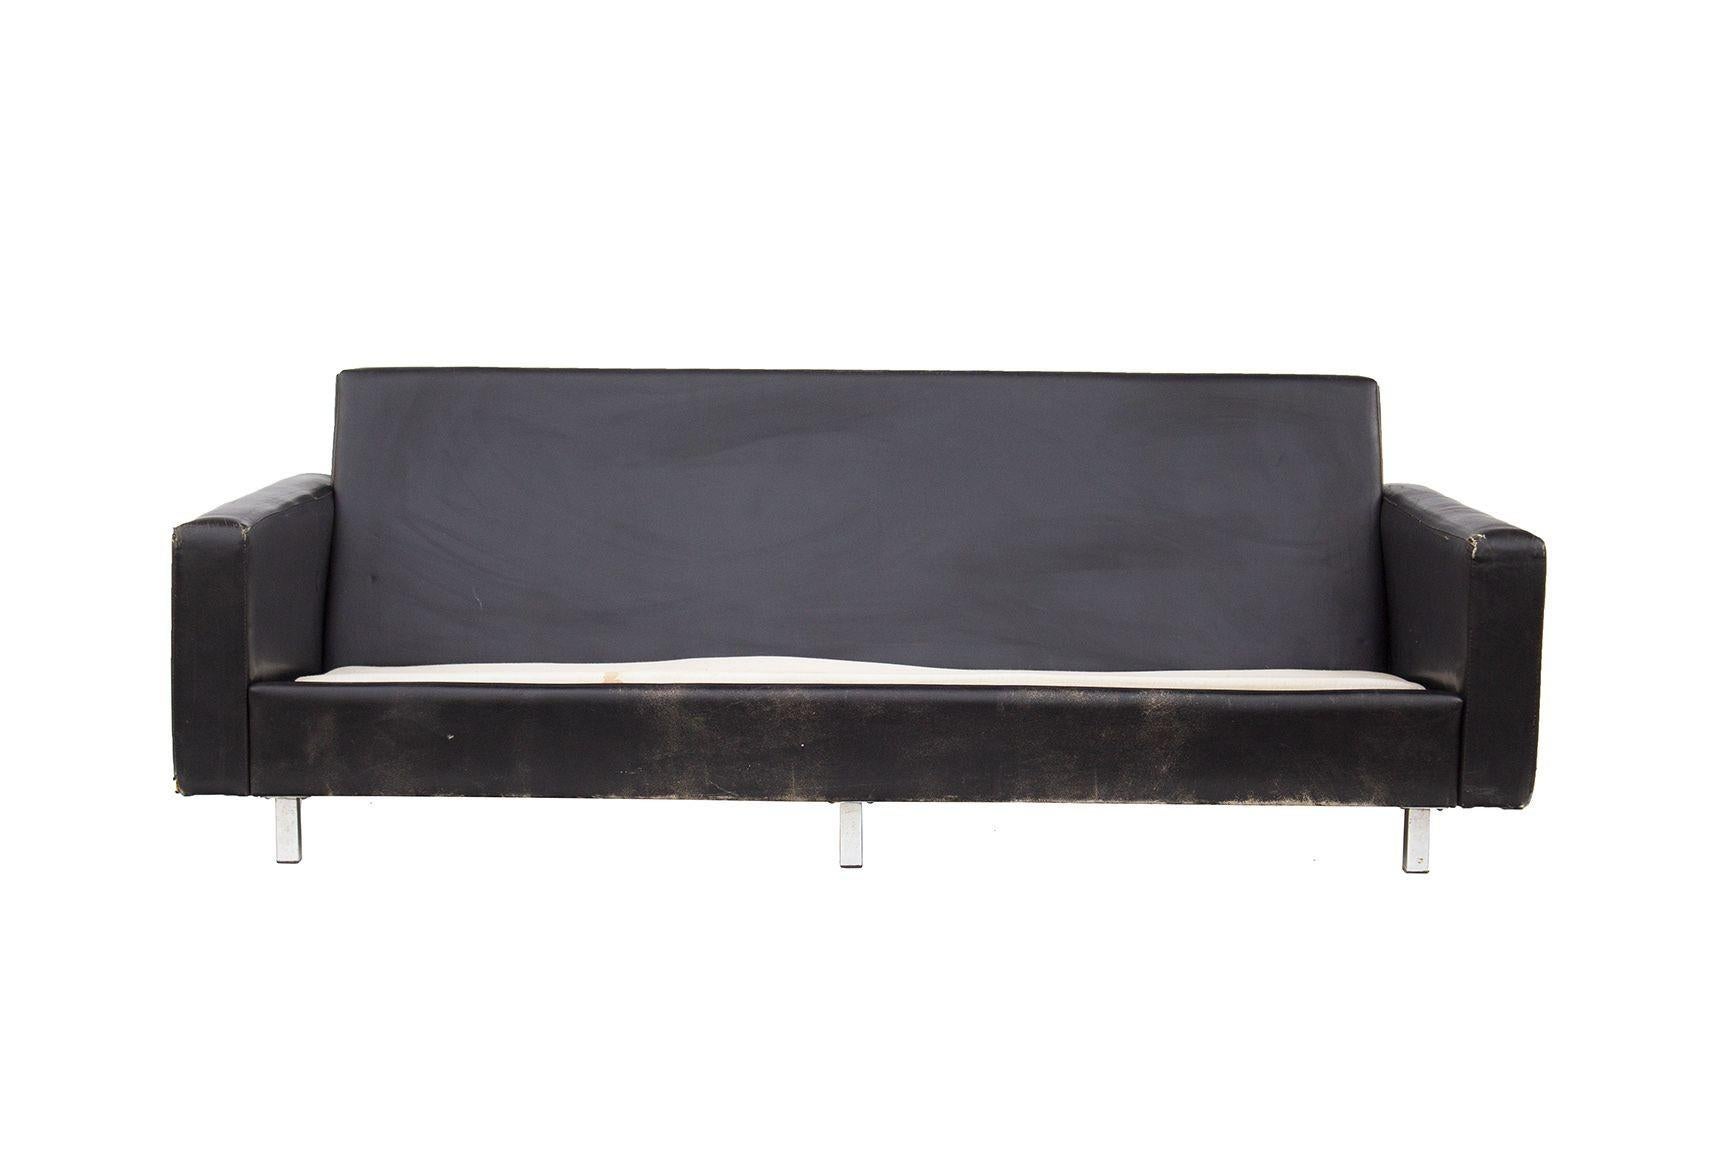 Mid-20th Century Tufted Black Leather Sofa, Imported from Europe in the '60s For Sale